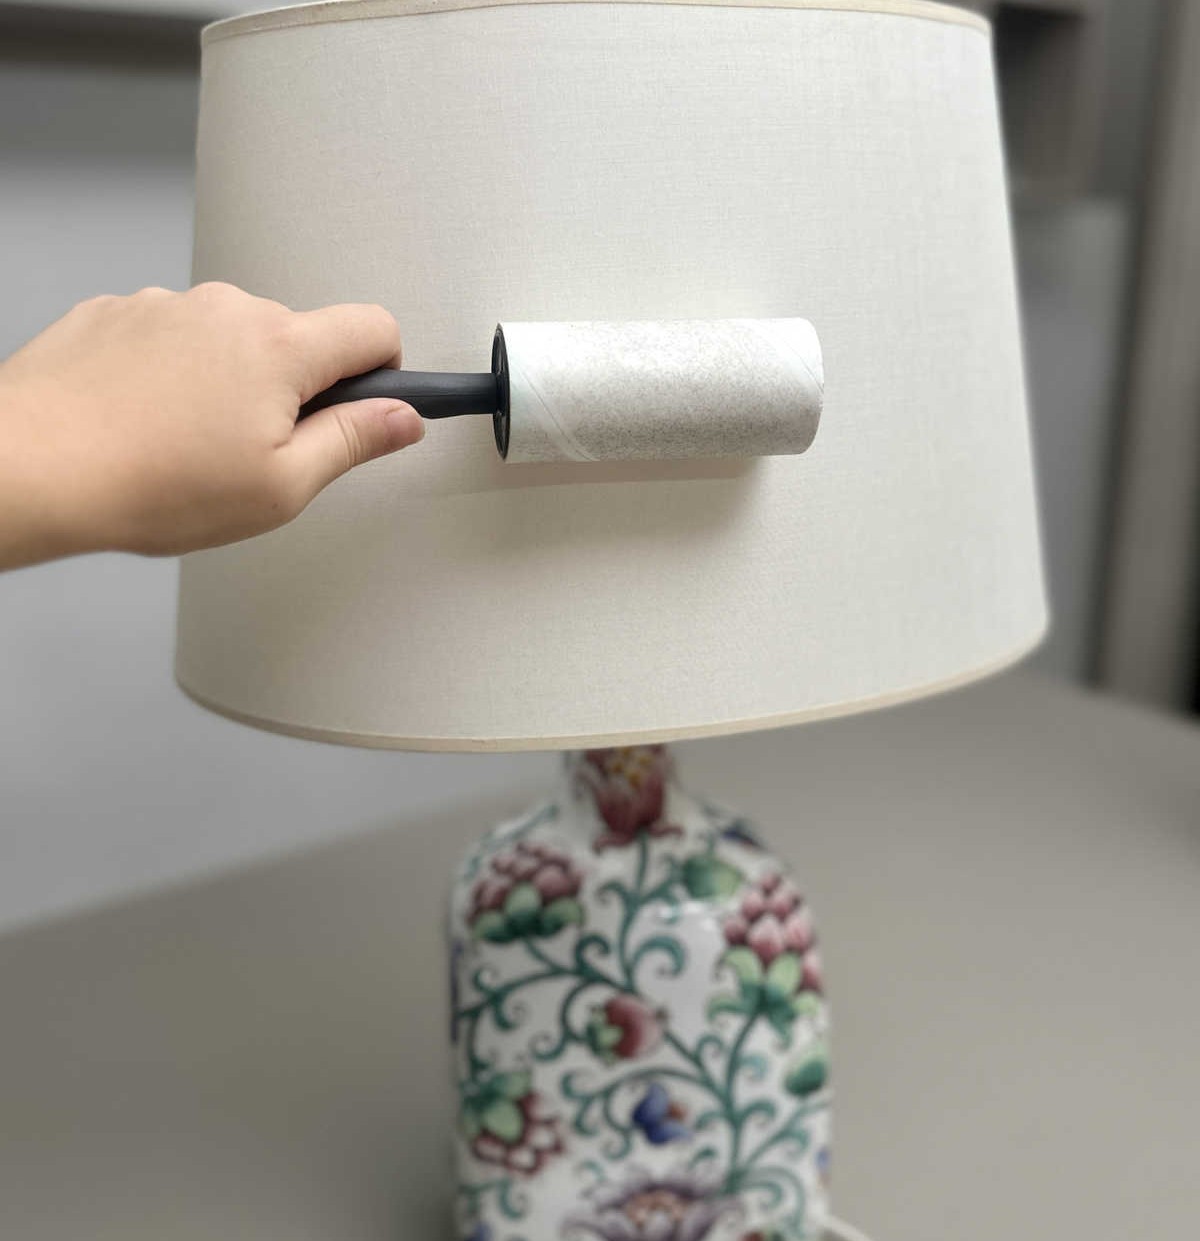 Use a Lint Roller to Dust a Lampshade